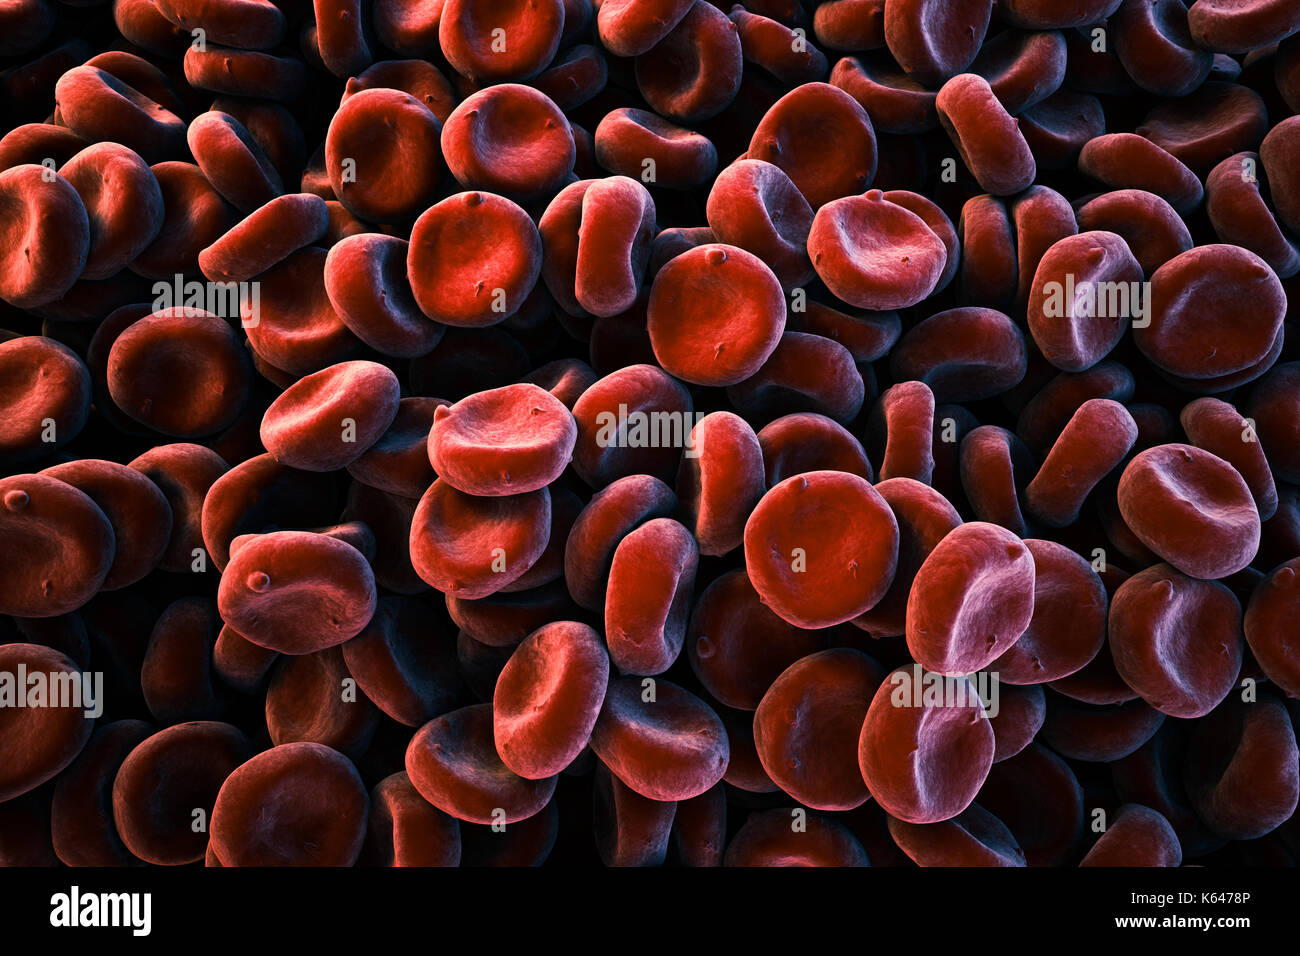 Close-up of image of oxygen carrying Red Blood Cells (Erythrocytes) piled up, full frame, SEM (Scanned Electron Microscope) color stylized depiction. Stock Photo